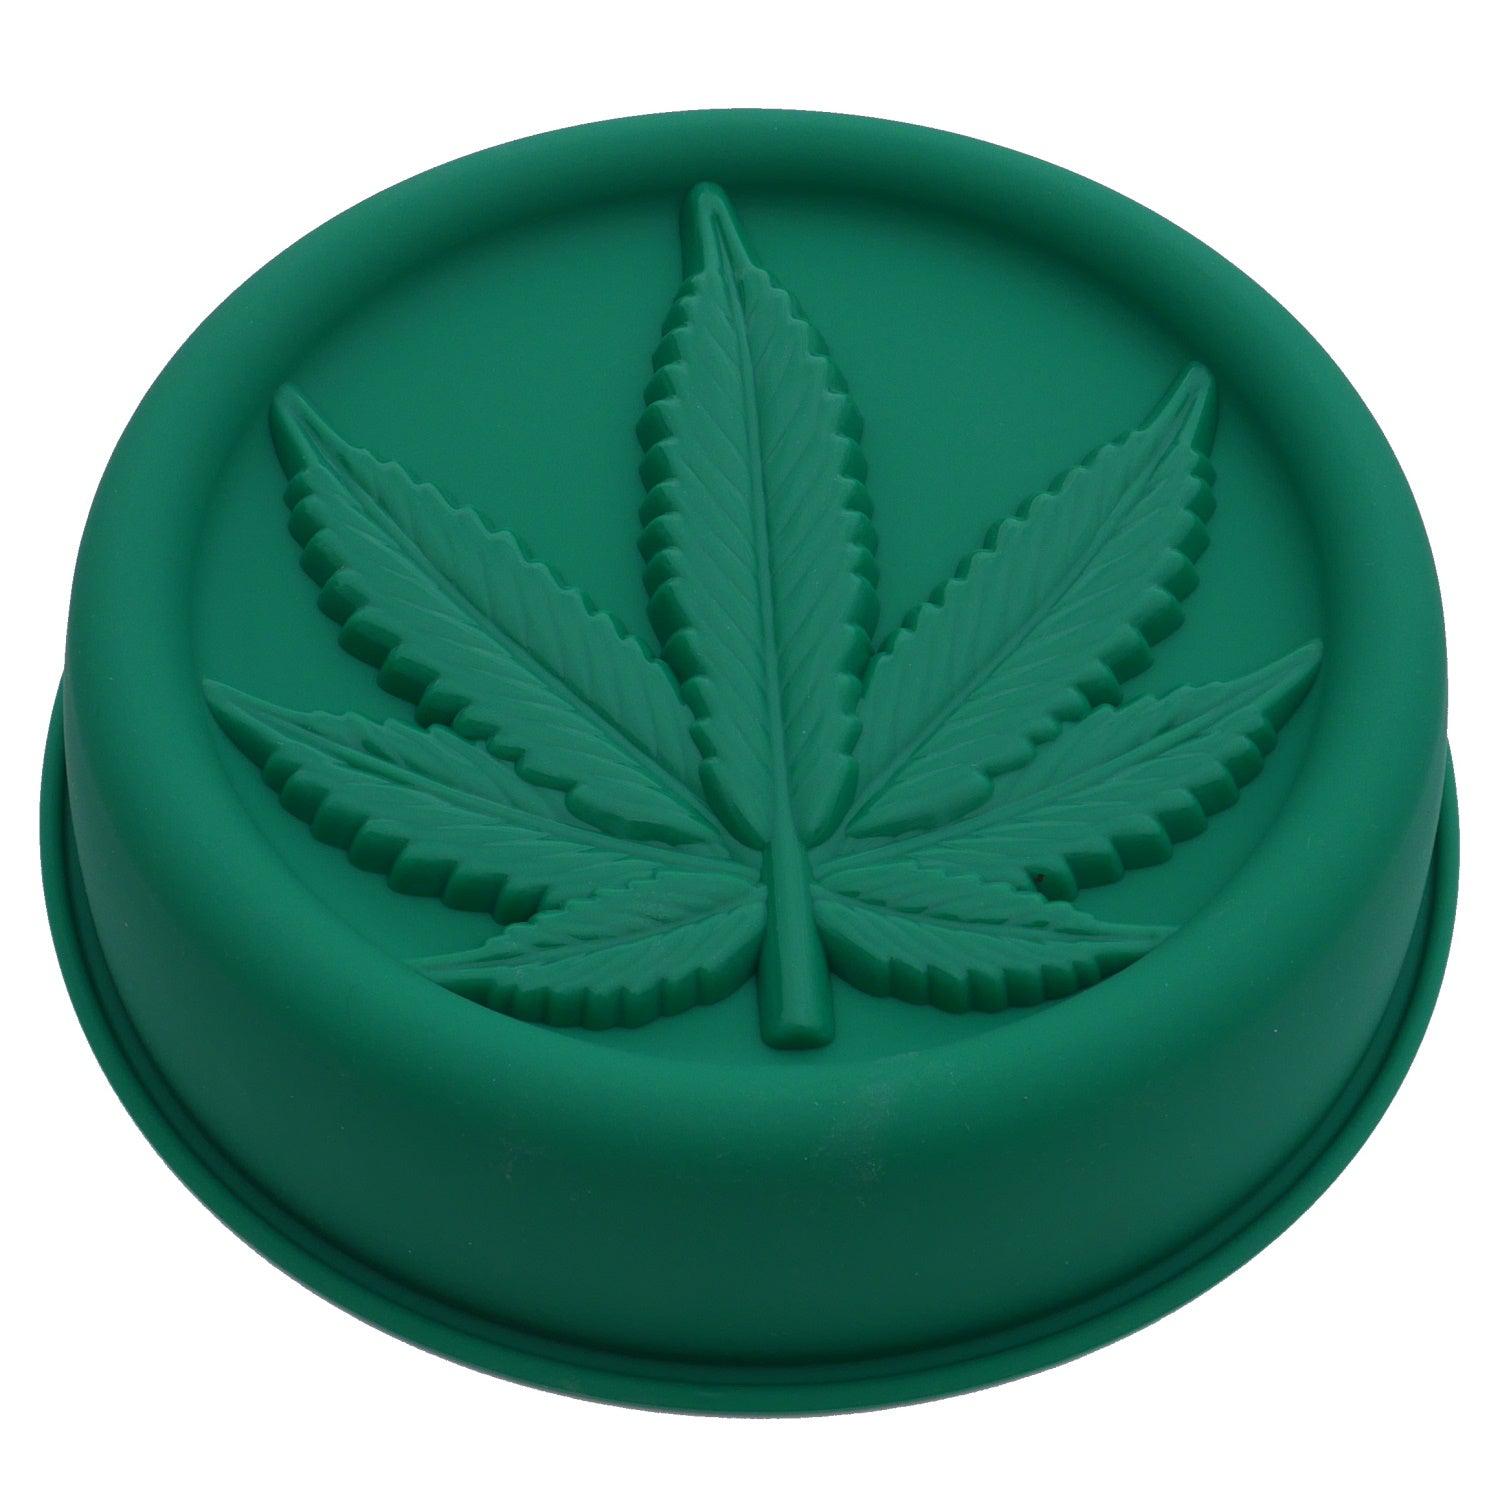  PJ BOLD Marijuana Weed Leaf Gummy Molds Silicone Candy Mold Kit  - 3 Pack : Home & Kitchen